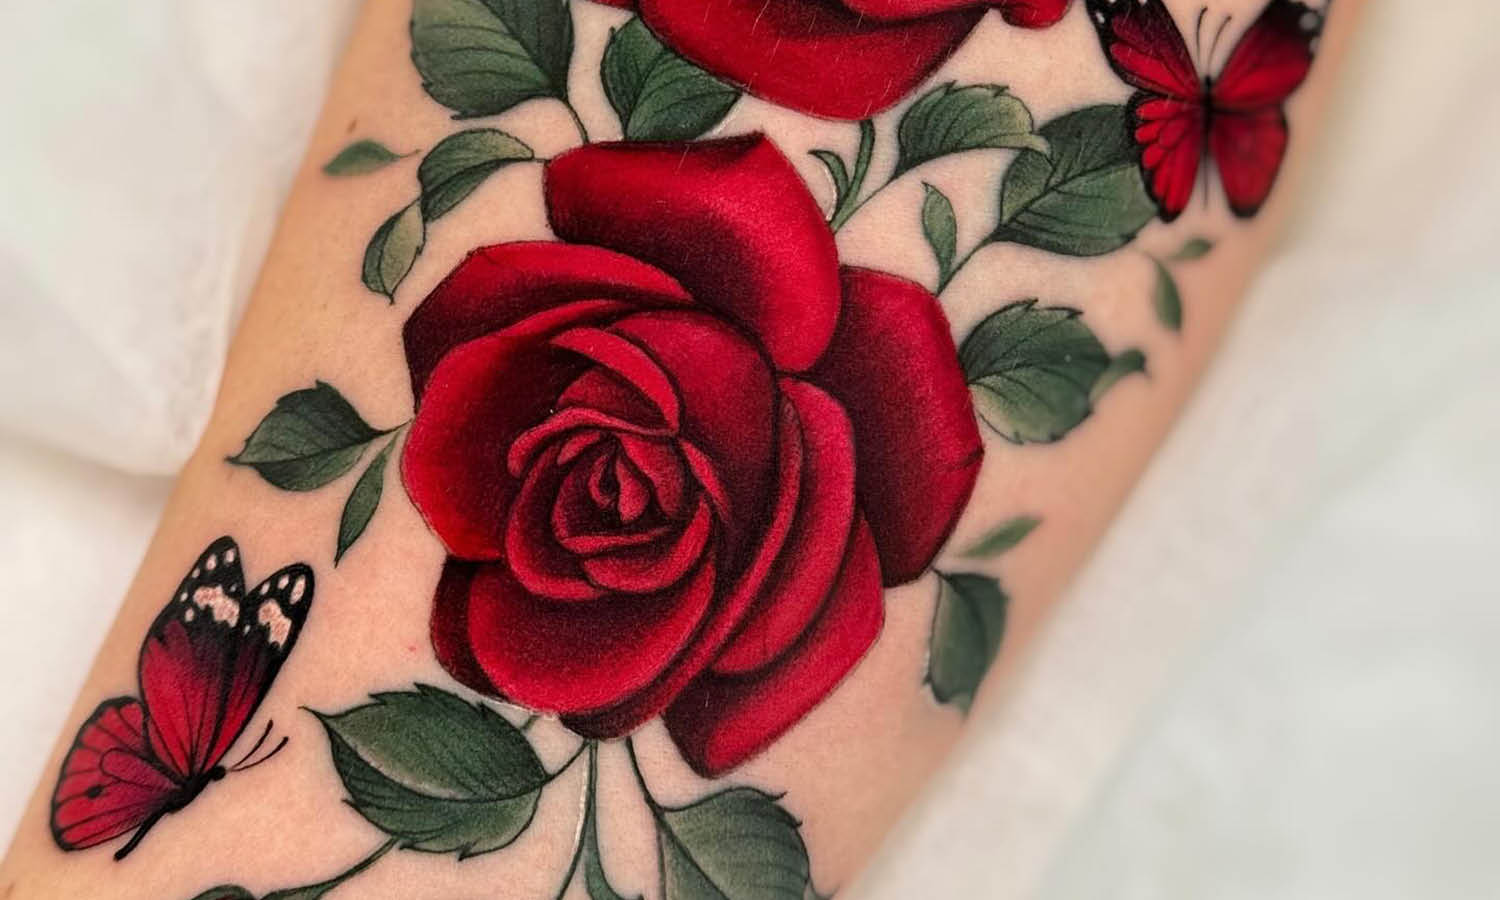 30 Best Rose Tattoo Ideas You Should Check